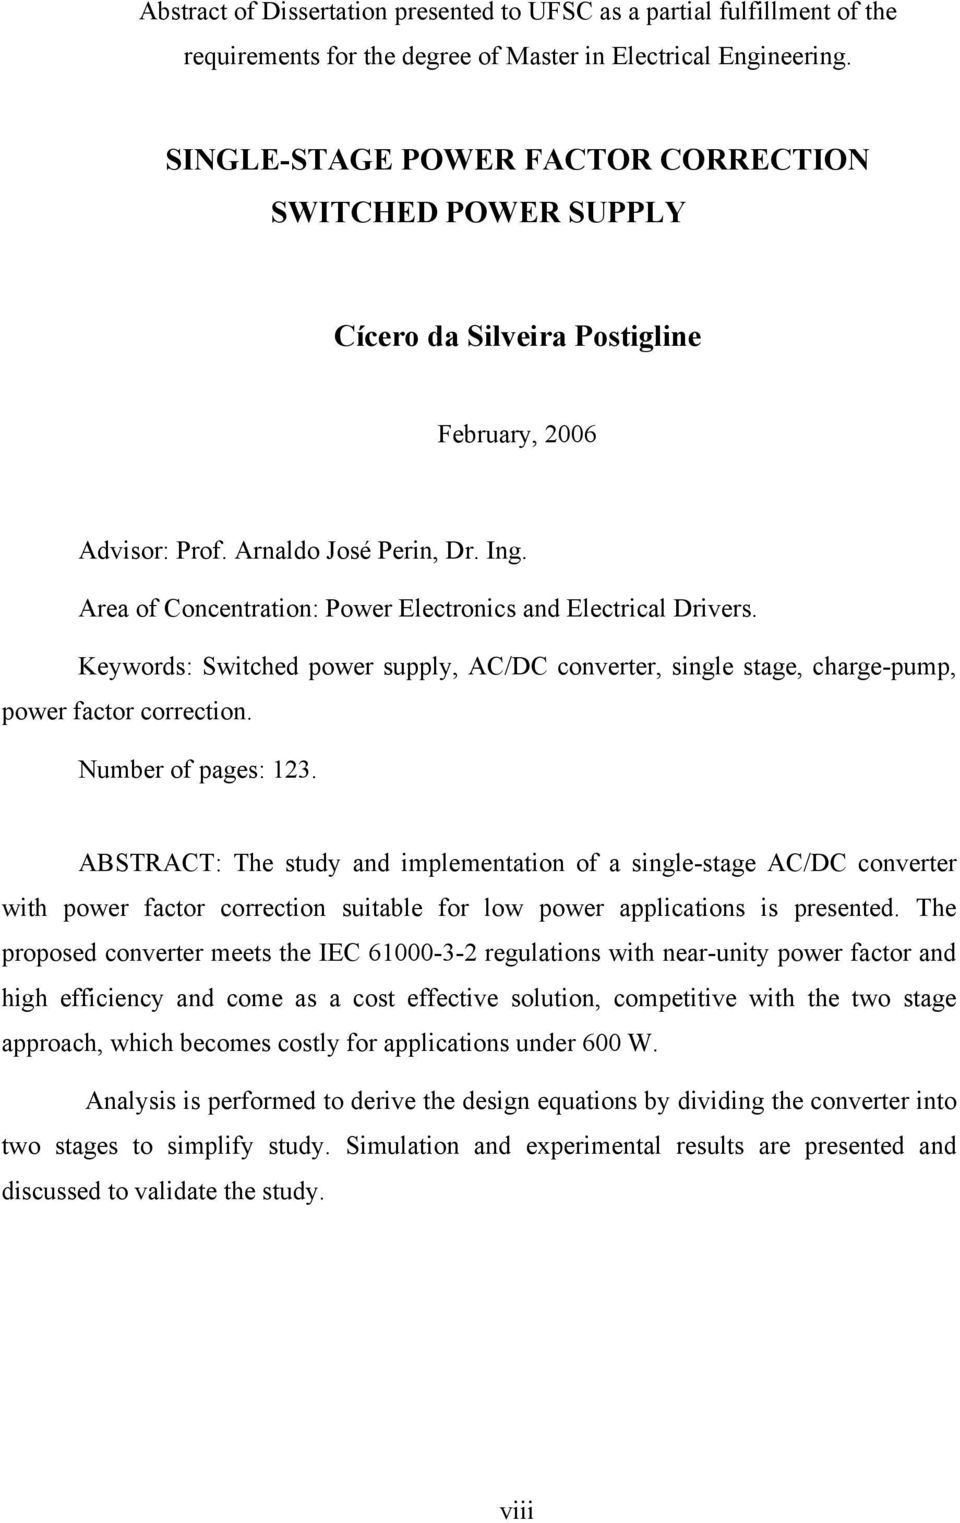 Area of Concentration: Power Electronics and Electrical Drivers. Keywords: Switched power supply, AC/DC converter, single stage, charge-pump, power factor correction. Number of pages: 123.